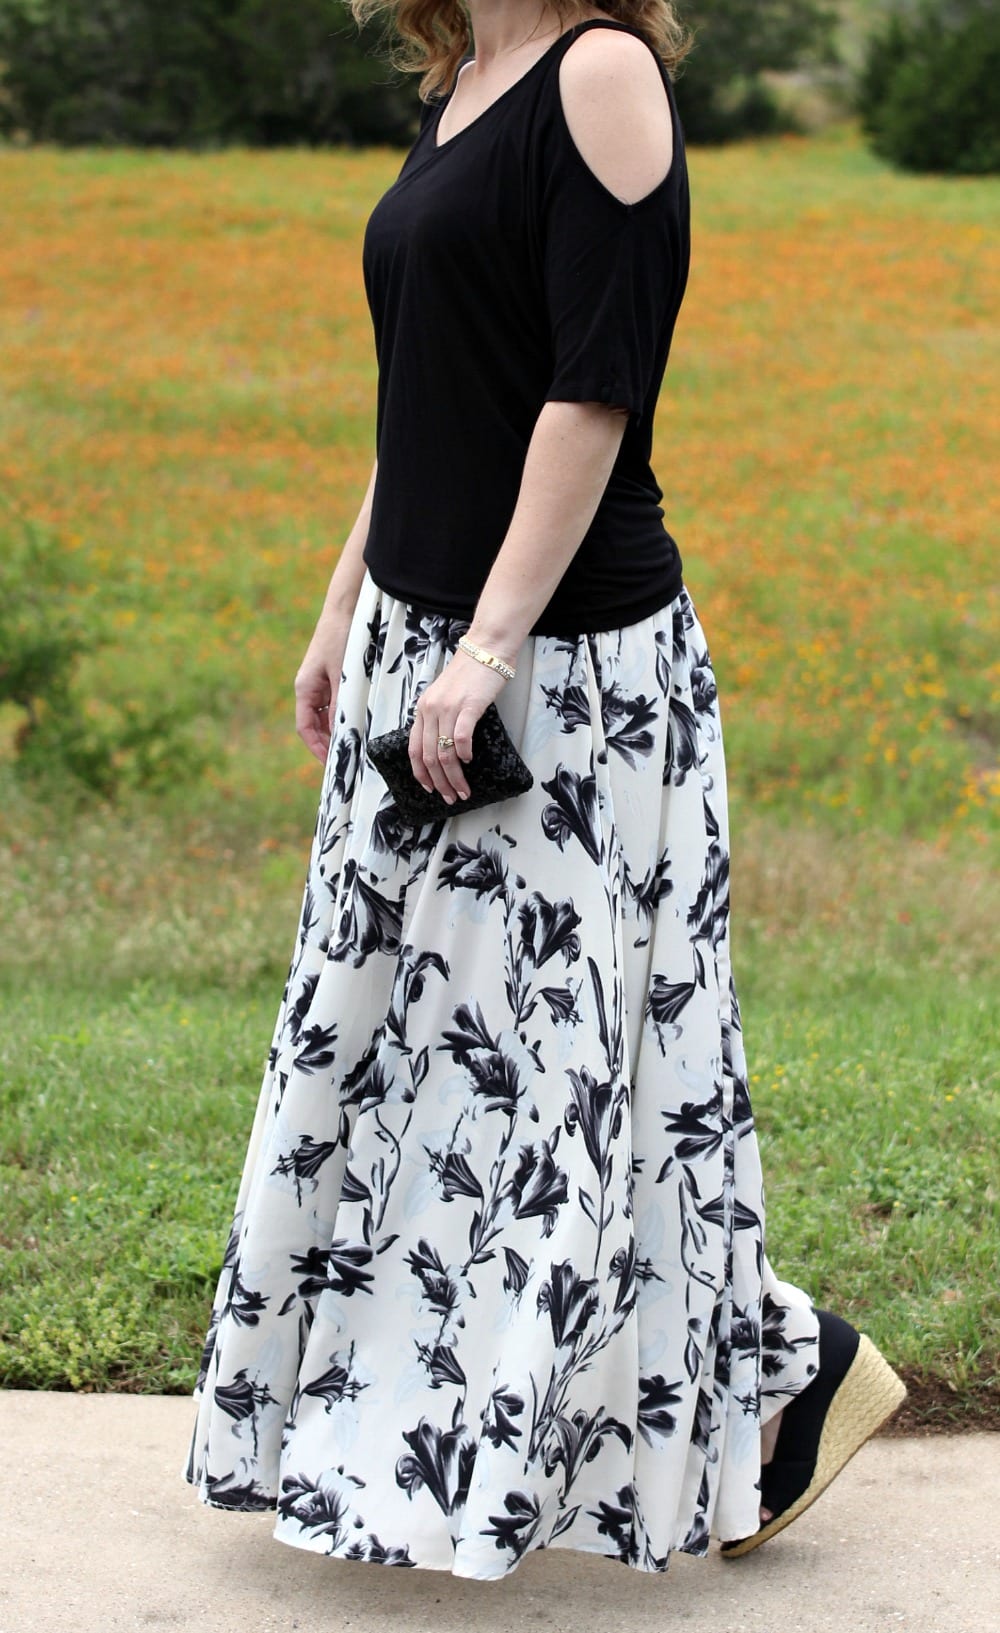 A dressed up maxi skirt outfit - break out the off the shoulder shirt or one with shoulder cutouts, pair it with a maxi skirt, wedges, clutch and some pretty accessories for the perfect date night summer outfit.